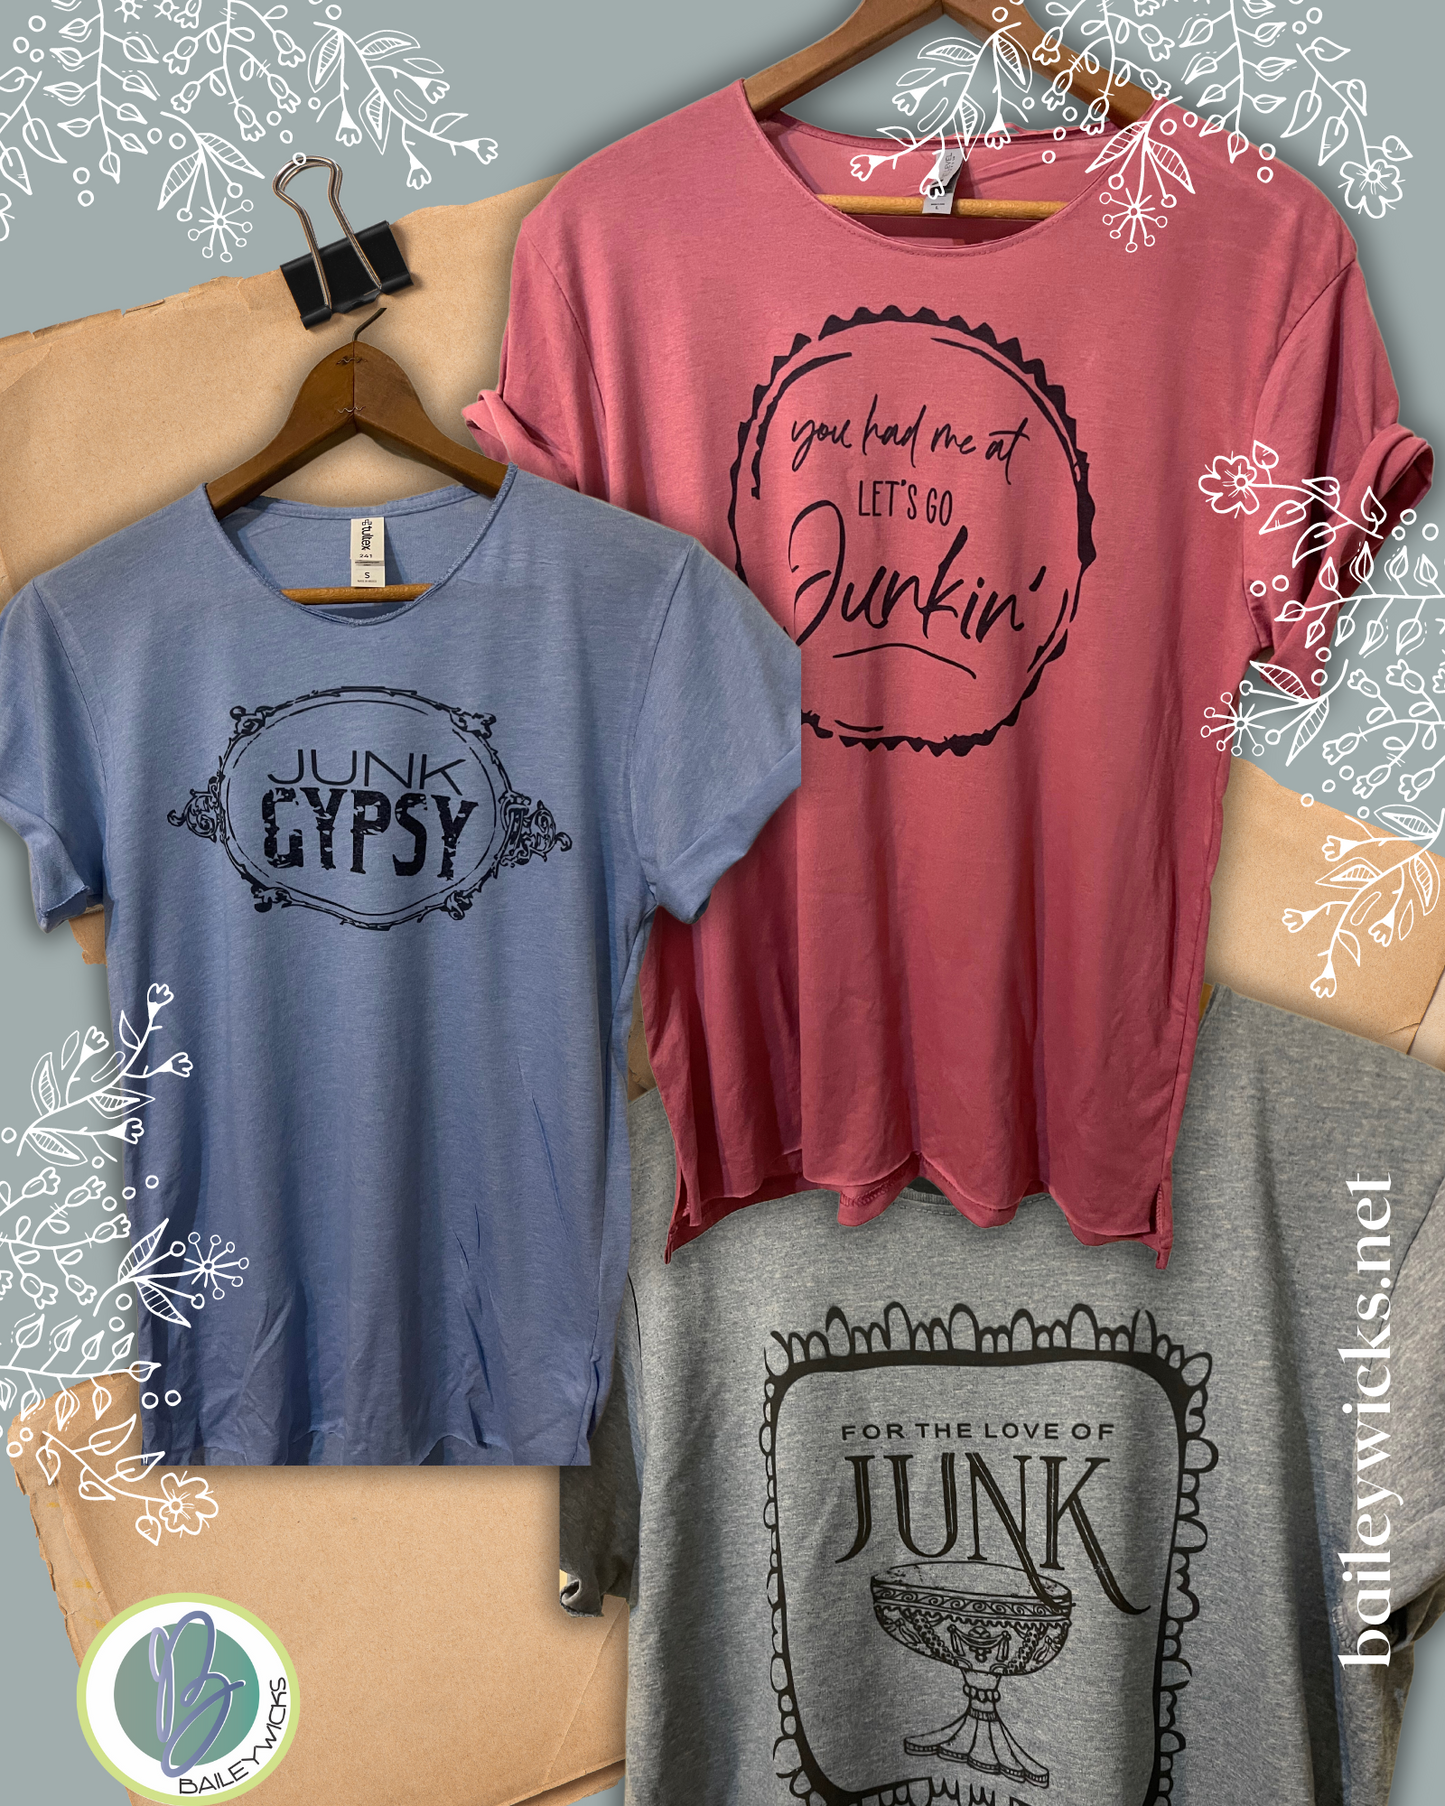 vintage lover t shirt, for the love of junk, junk gypsy, thrifted life, you had me at let's go junkin'